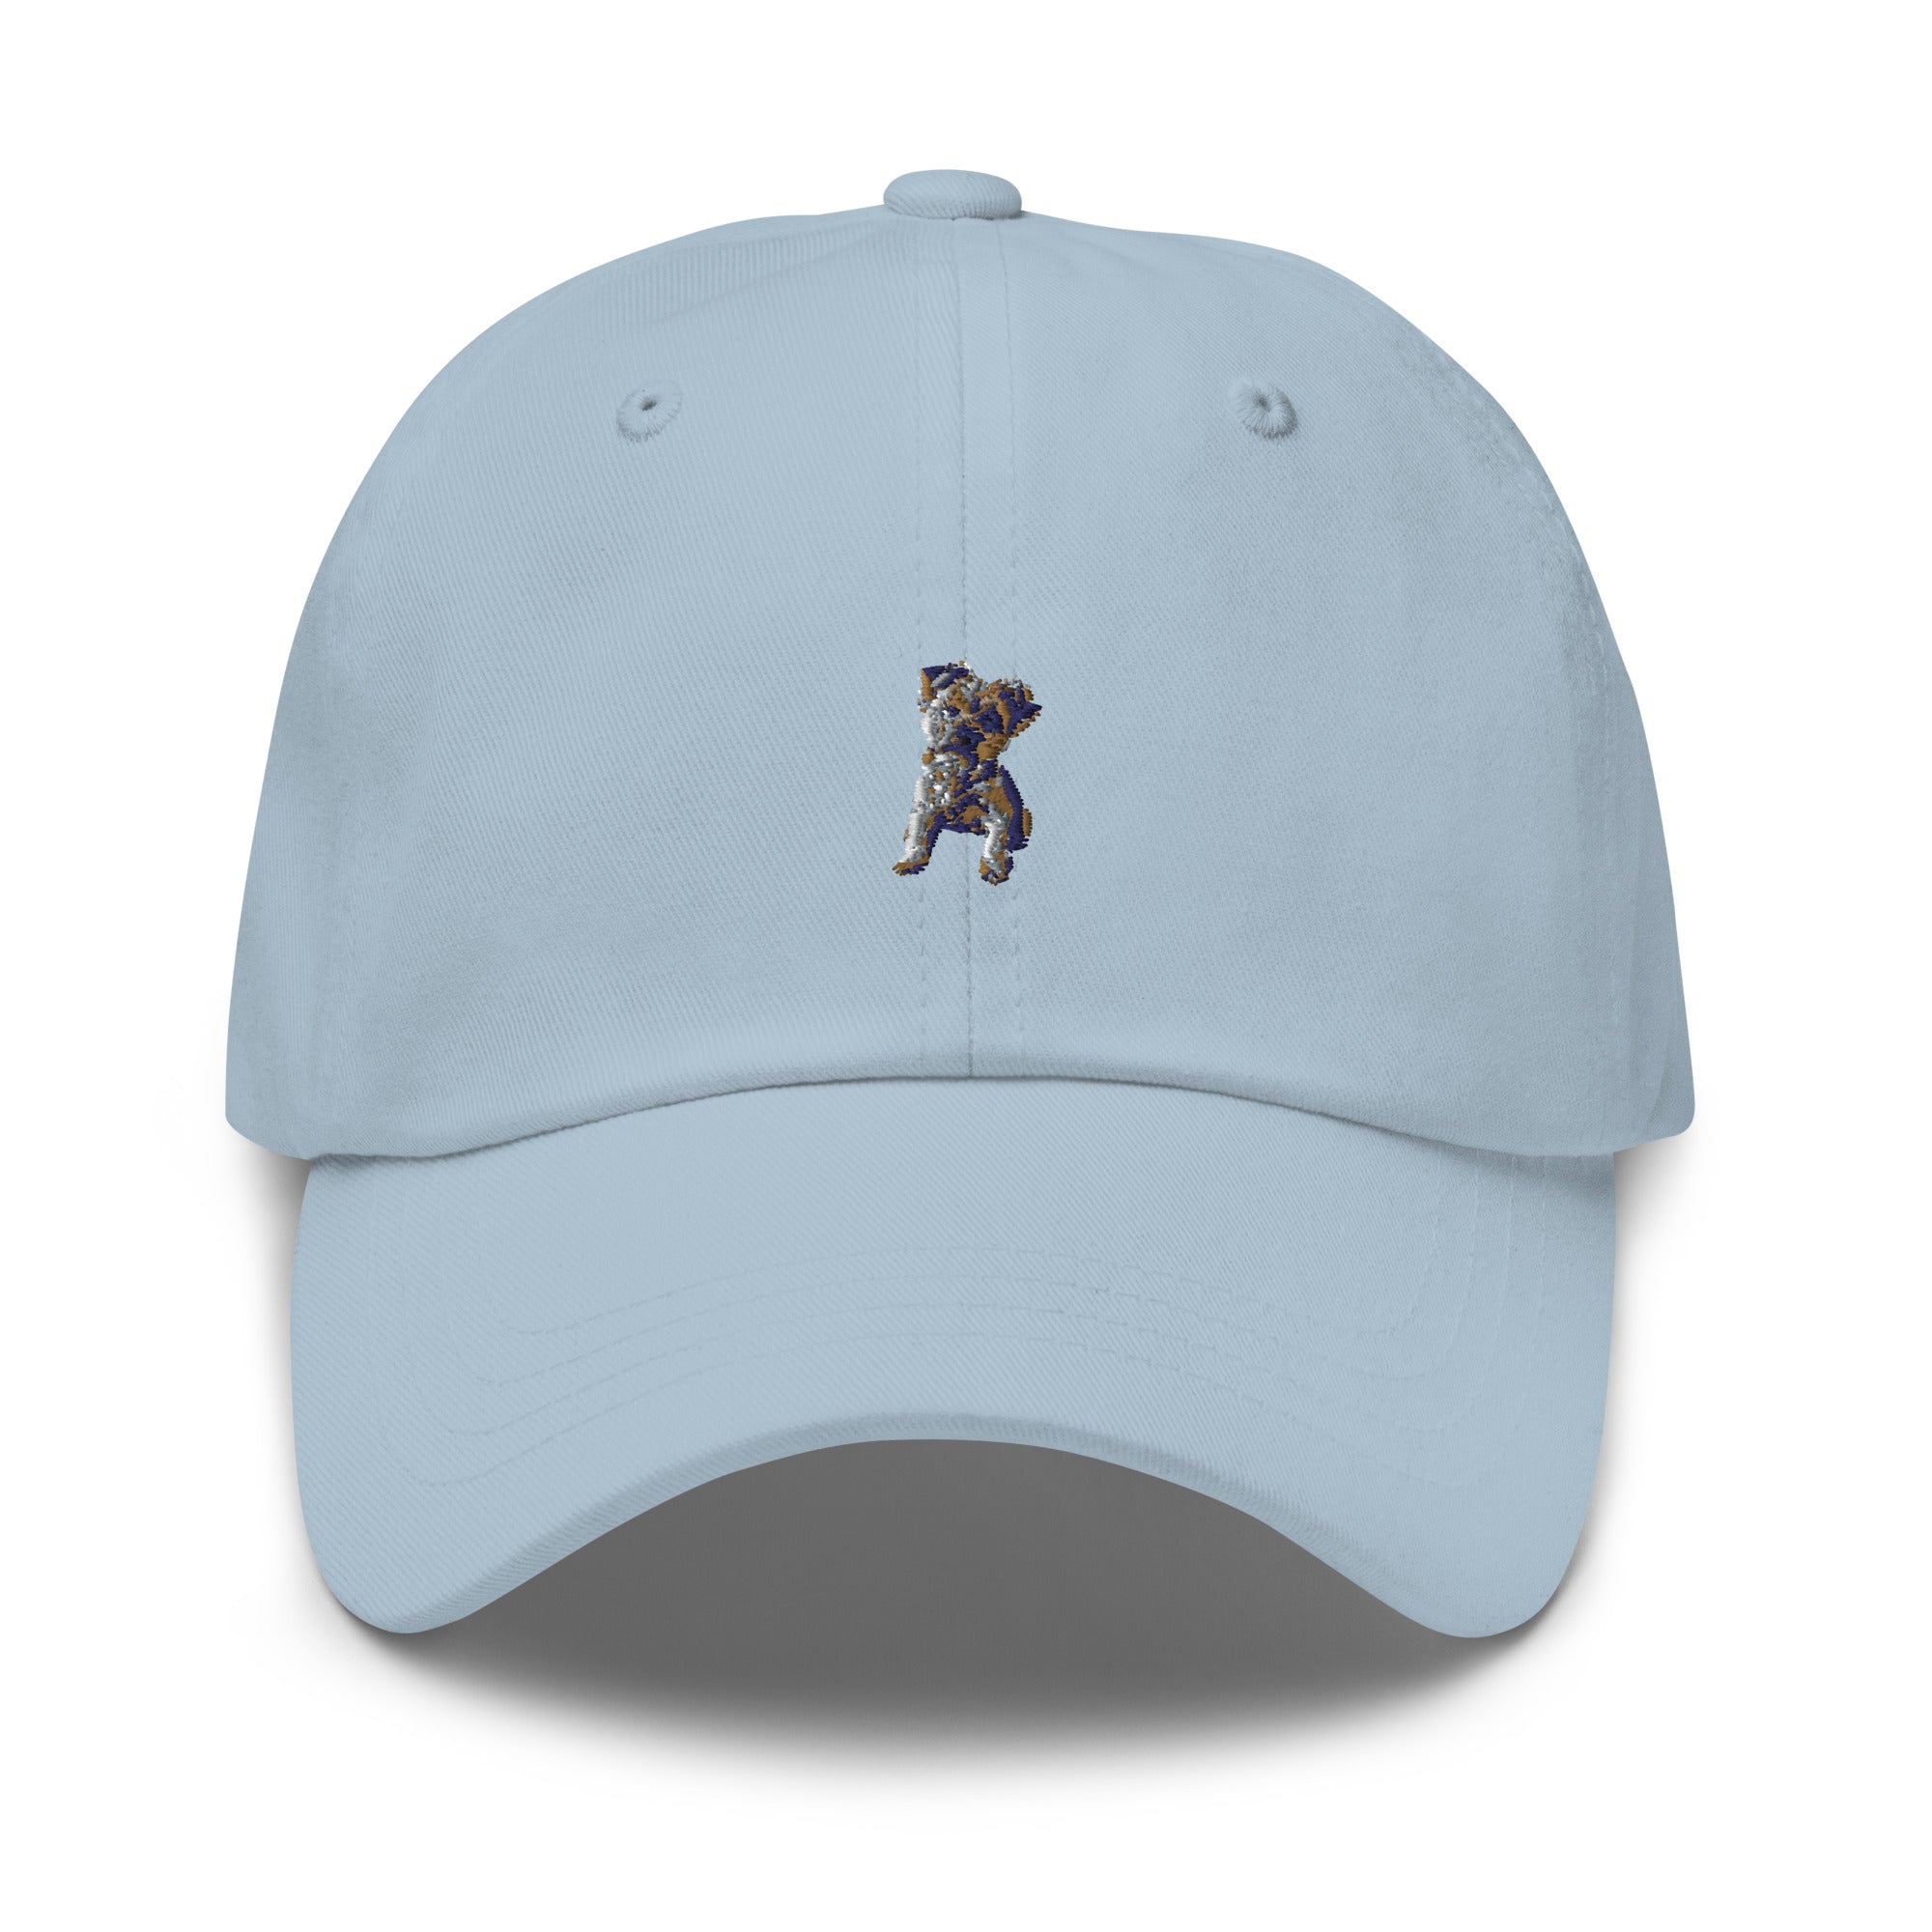 Petly Prints Personalized Pet Portrait Embroidered Dad Hat